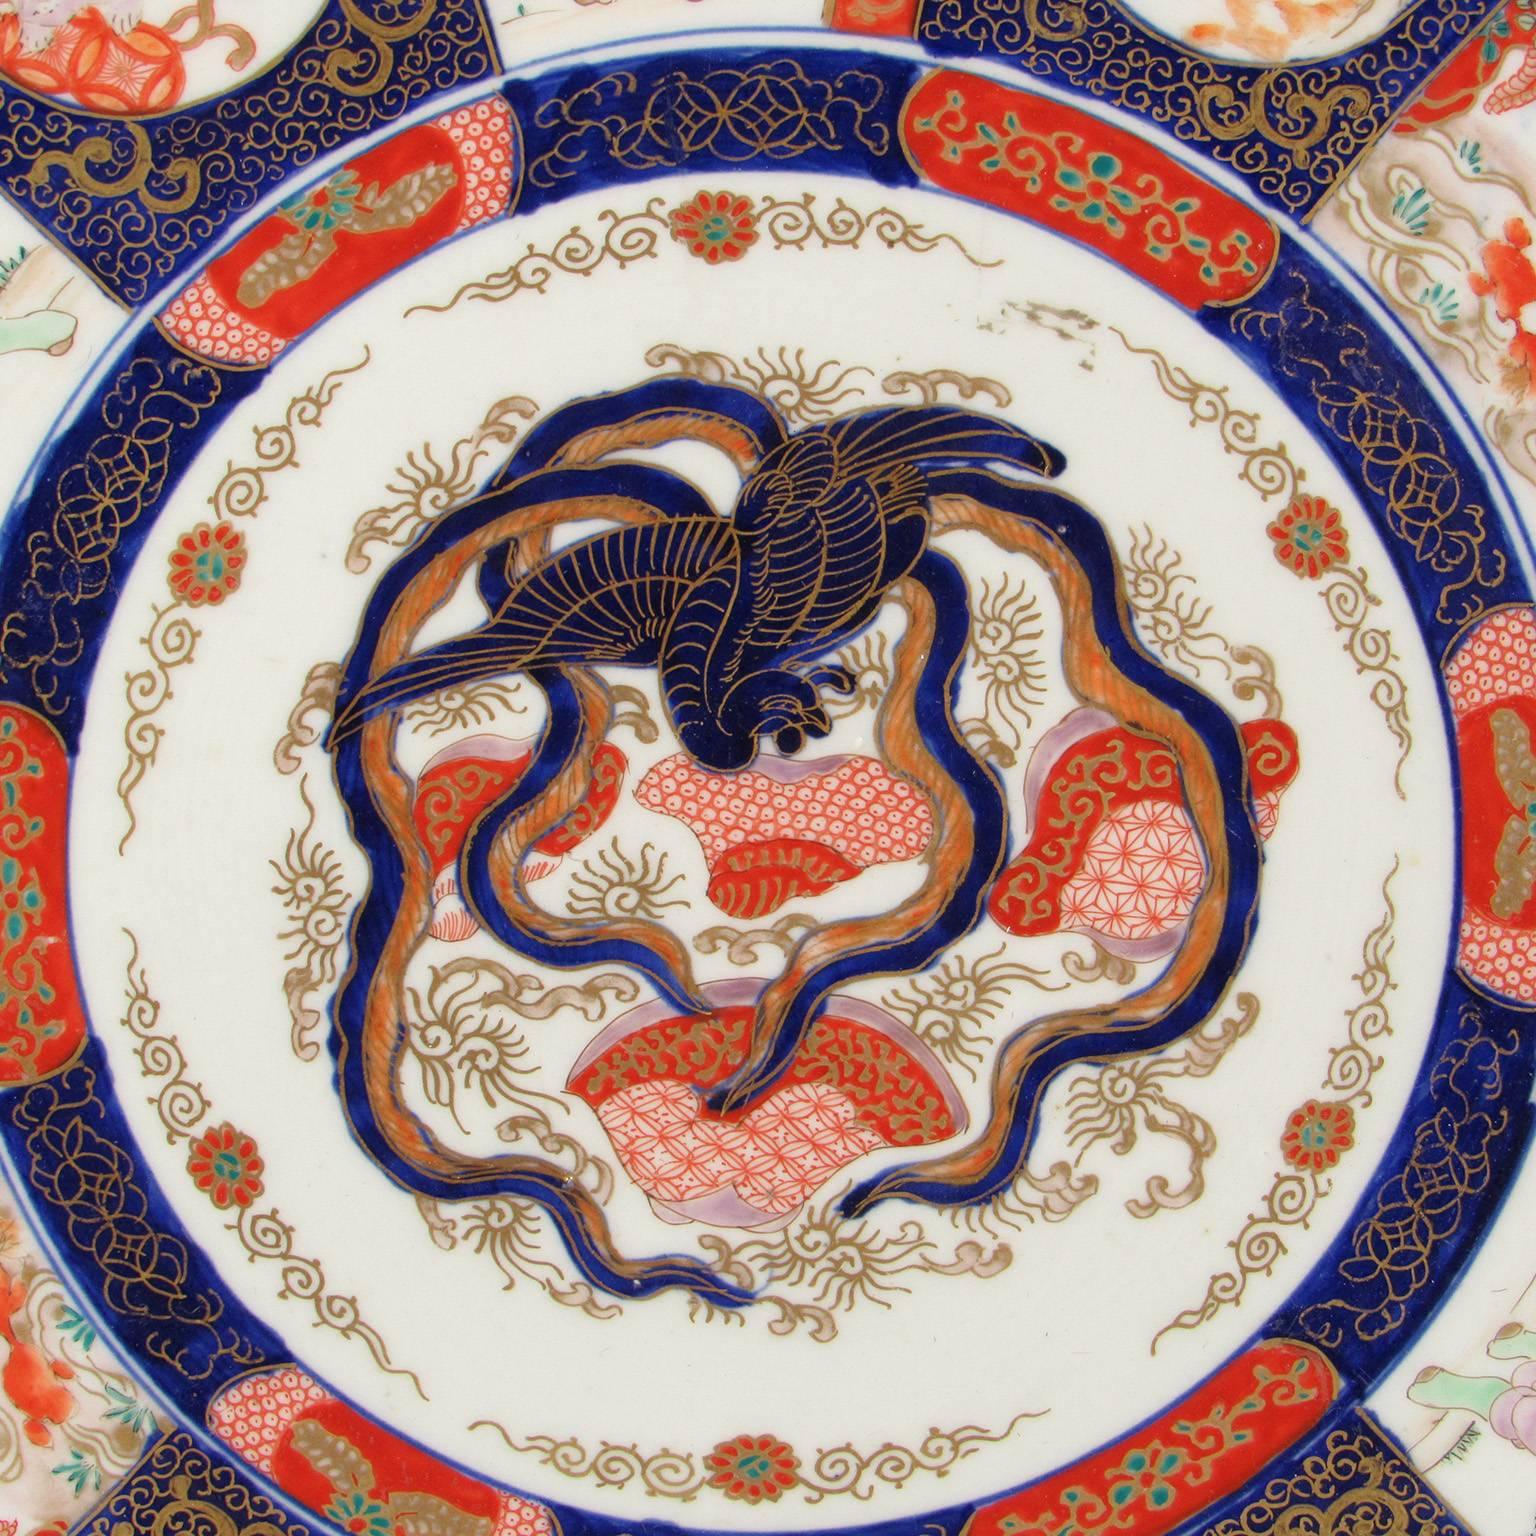 Japanese imari charger, circa 1840.
Diameter: 16 inches.
Provenance: Acquired in 1978 from Harumi Antiques, Tokyo, Japan.